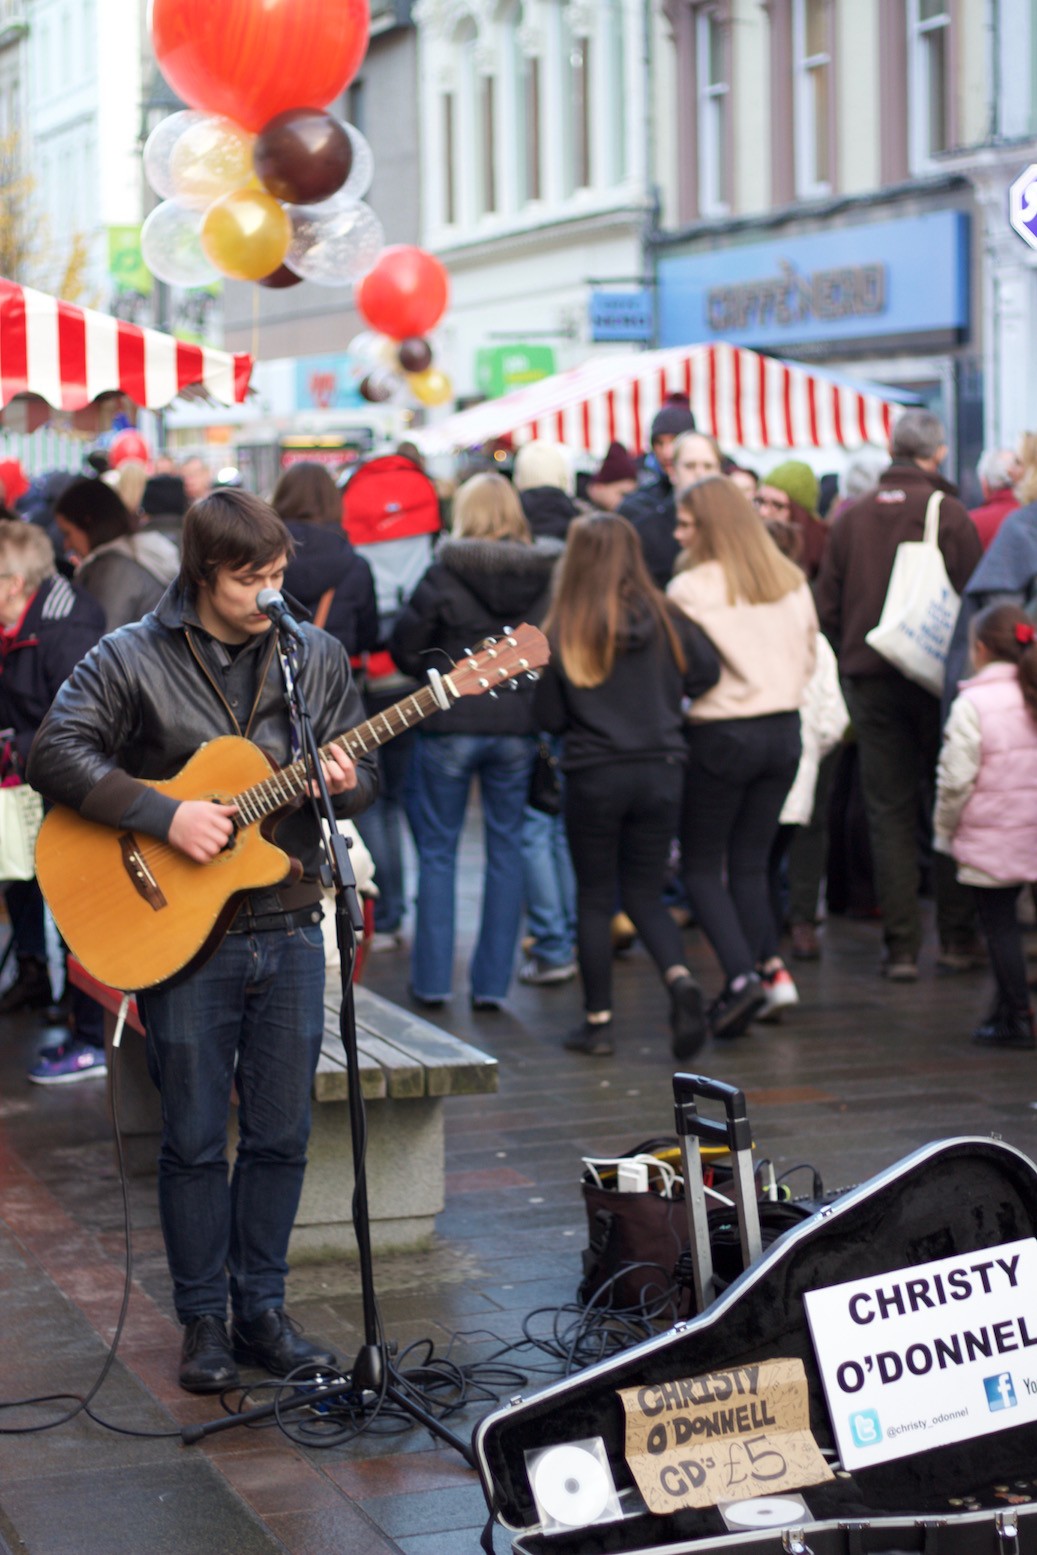 Jack got this great picture of local busker Christy O'Donnell singing in the High Street during the Chocolate Festival.